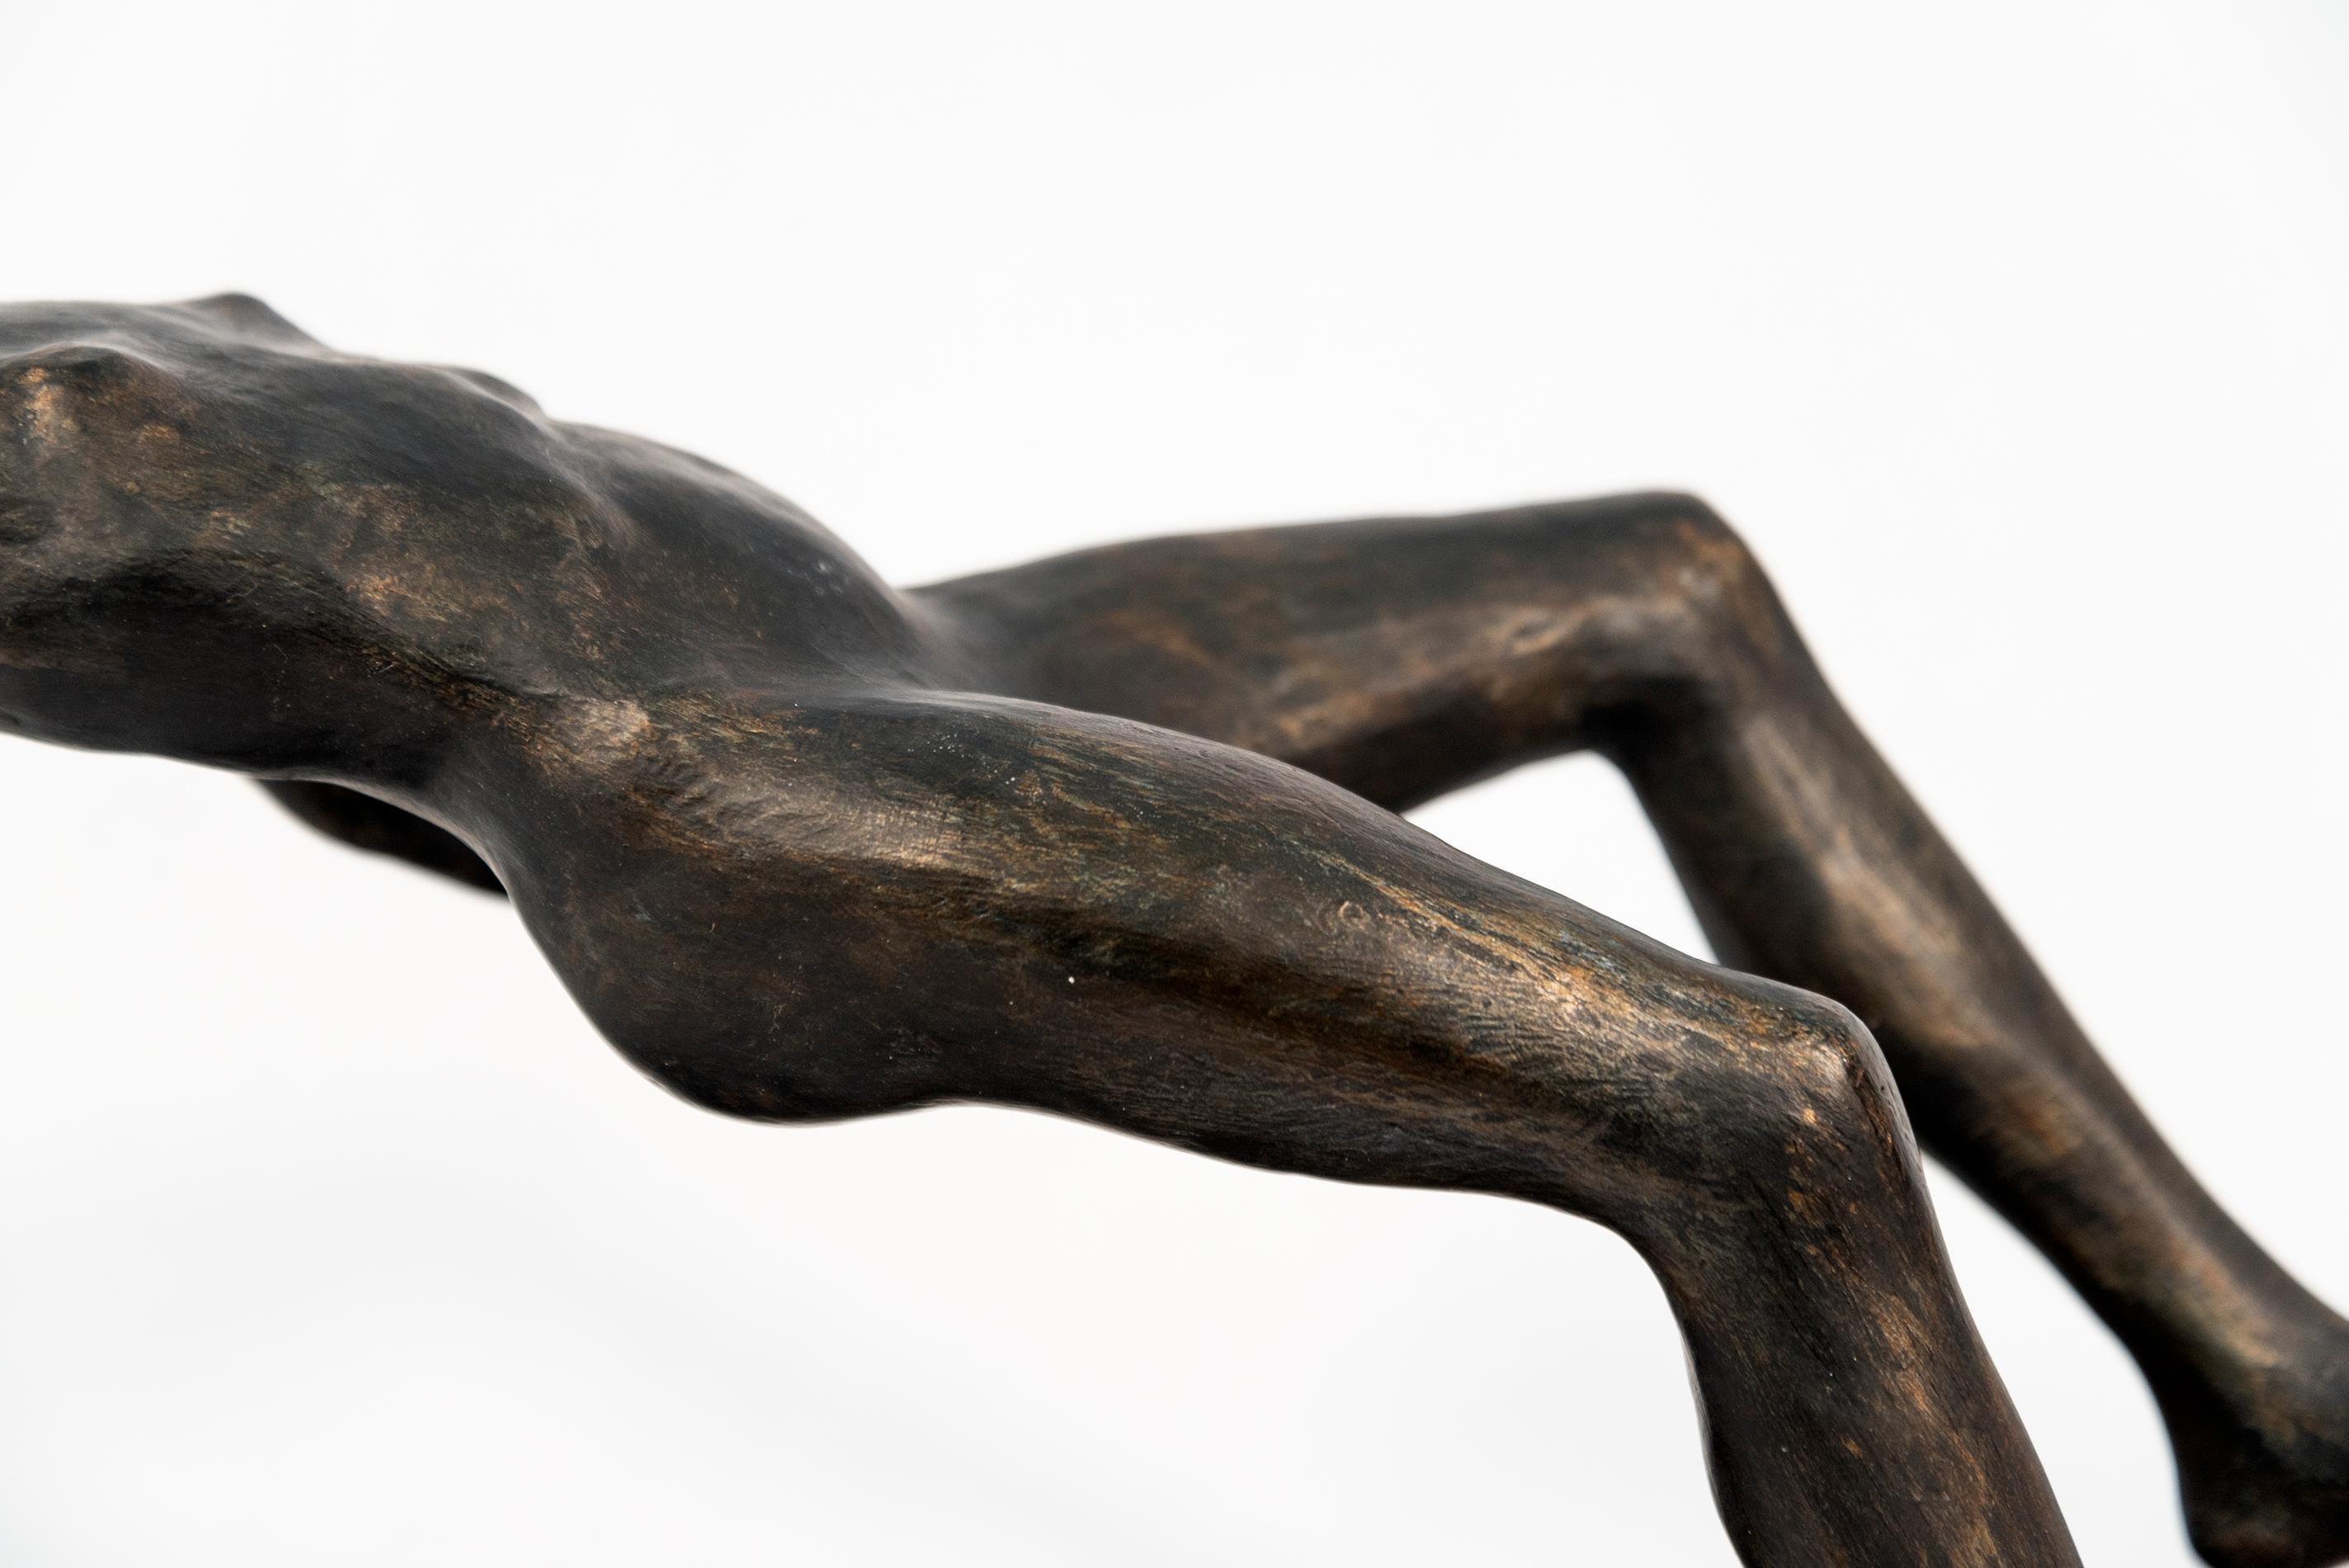 Frances Semple’s beautiful and elegant sculptures often appear in motion. Defying gravity, a horizontal figure appears to float on its back above its shadow. This table top piece is made of resin and has a black wood base. Is the title a reference